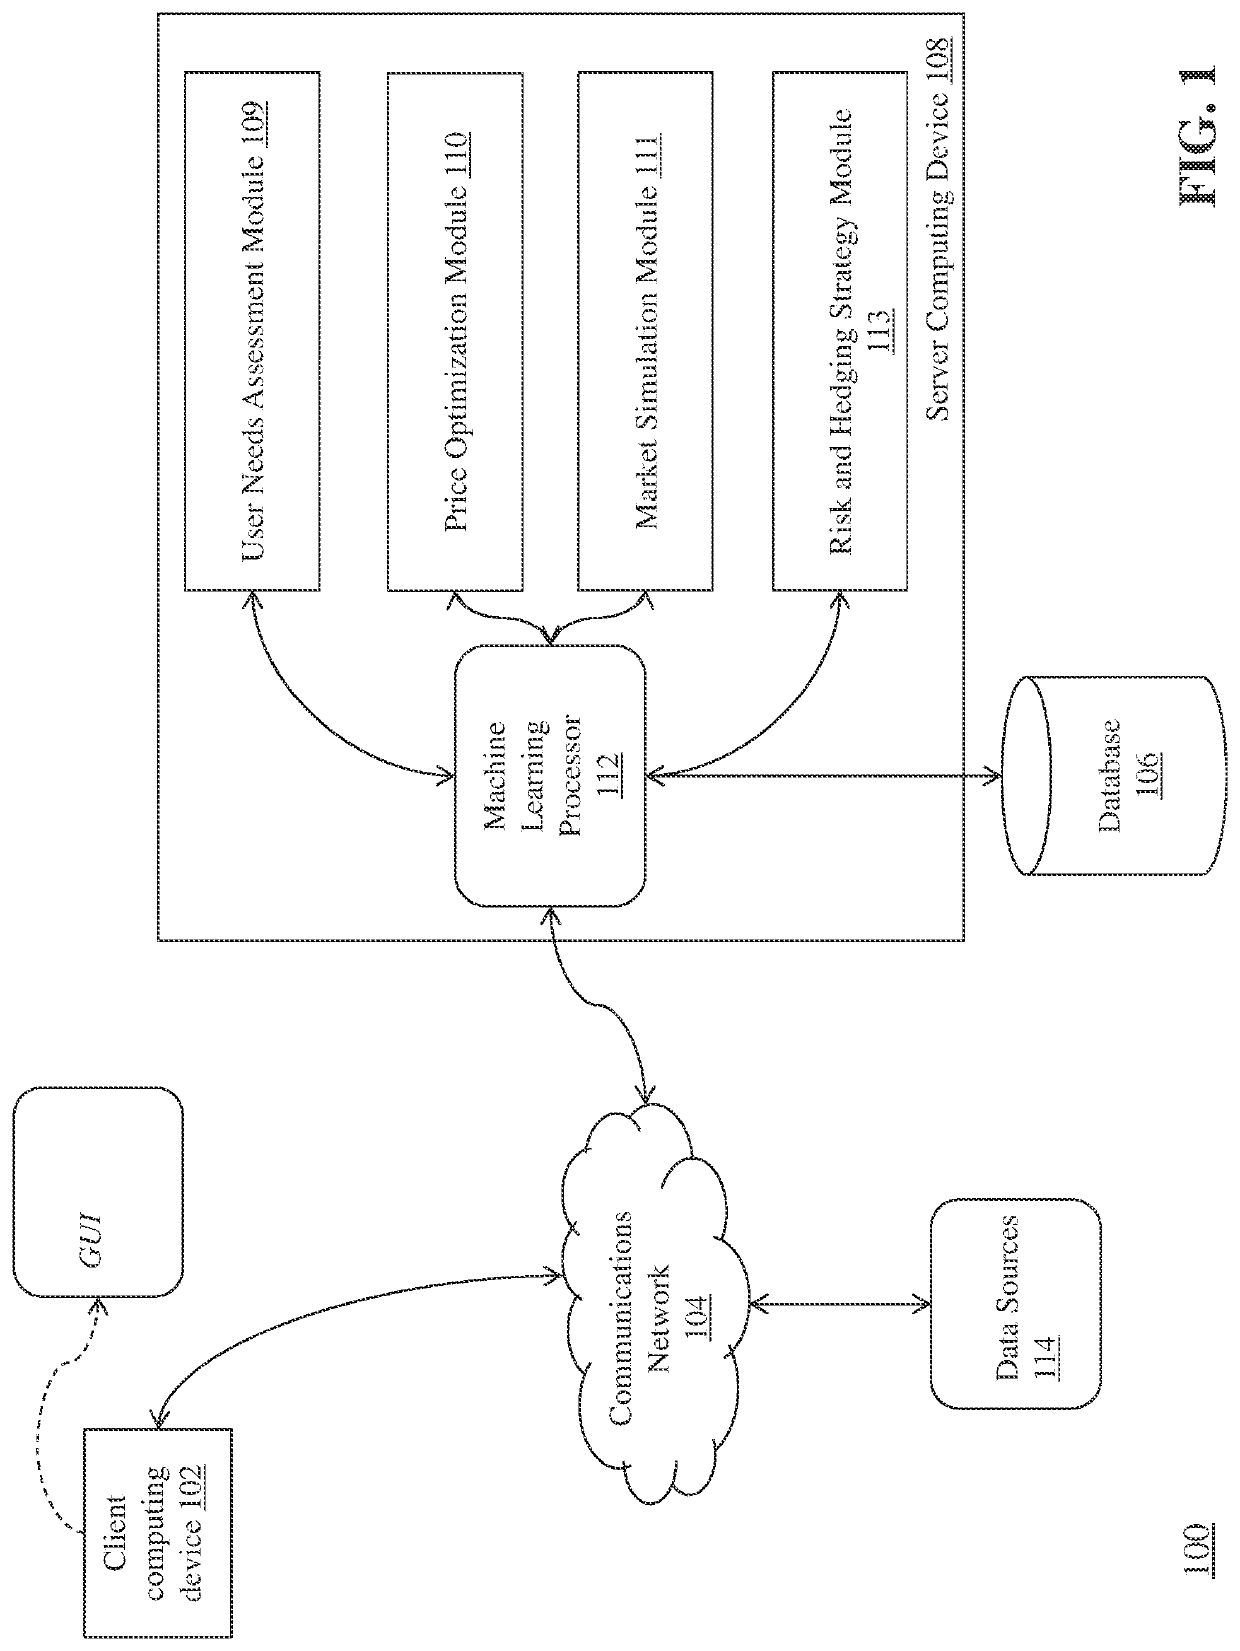 Systems and methods for interactive annuity product services using machine learning modeling